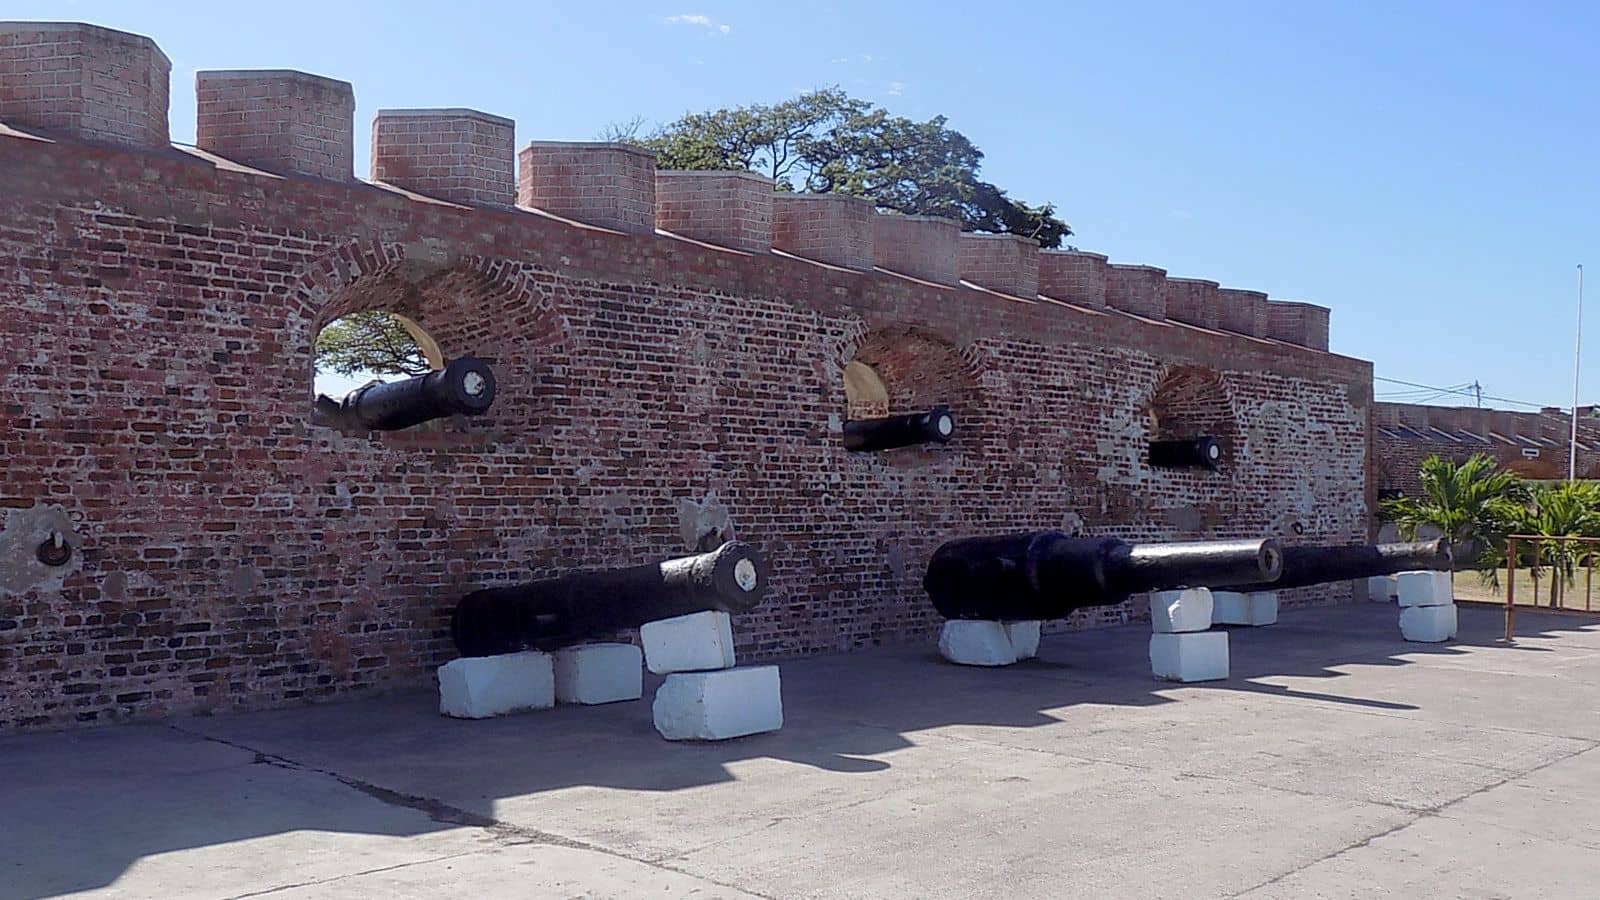 Cannons at Port Royal in Jamaica